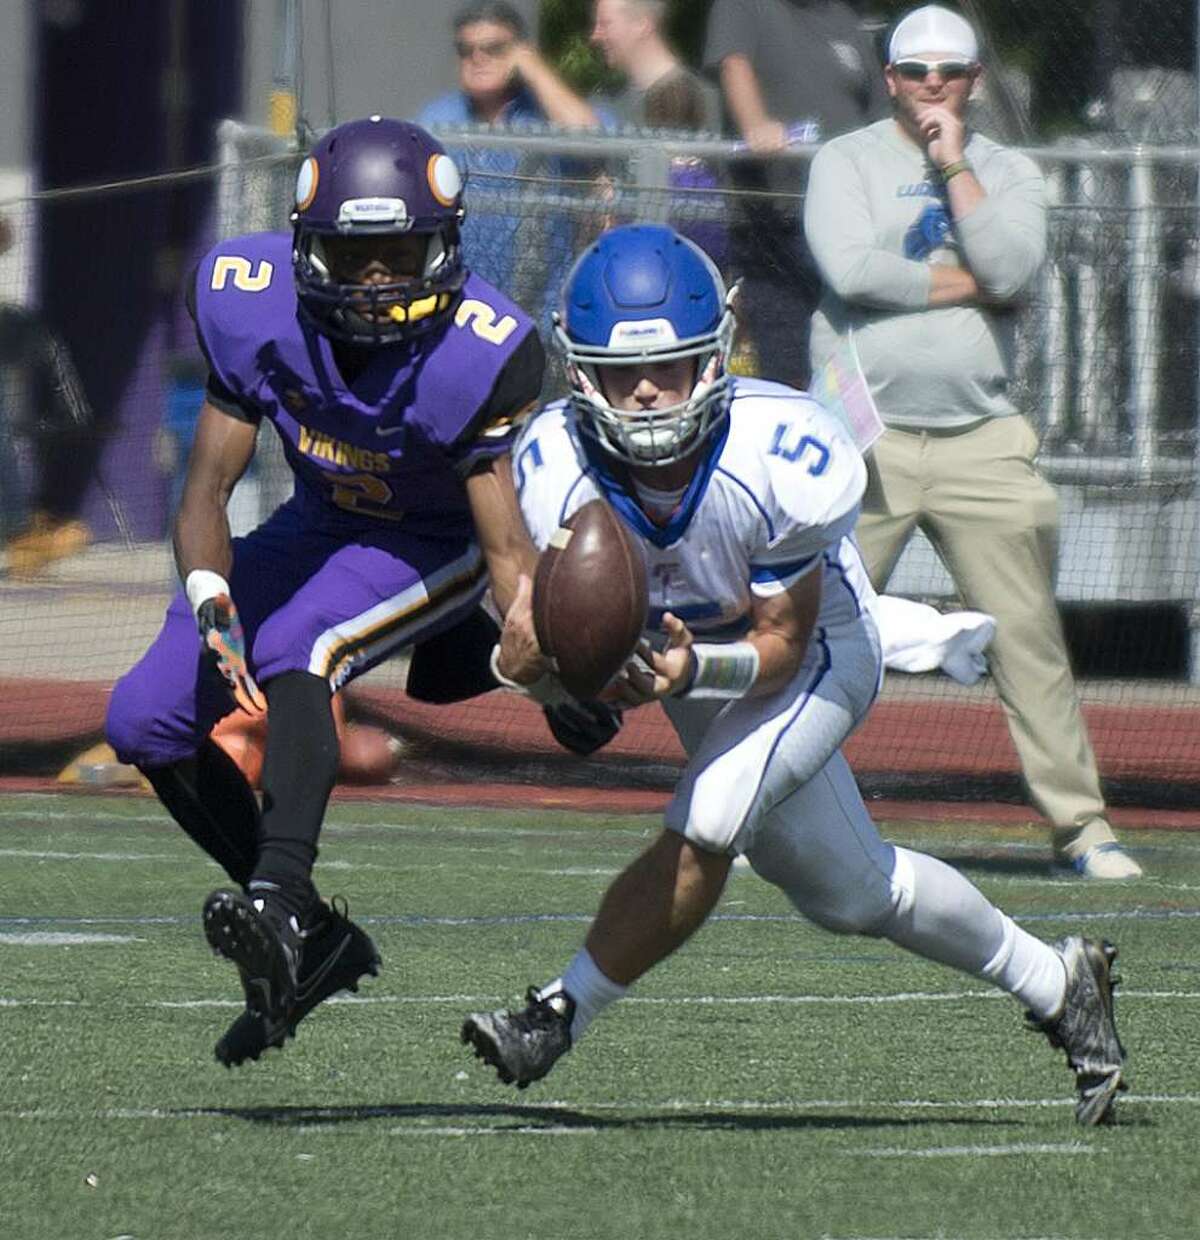 Fairfield Ludlowe’s Kevin Quinn breaks up a pass vs. Westhill last season. (Lindsay Perry, For Hearst Connecticut Media)